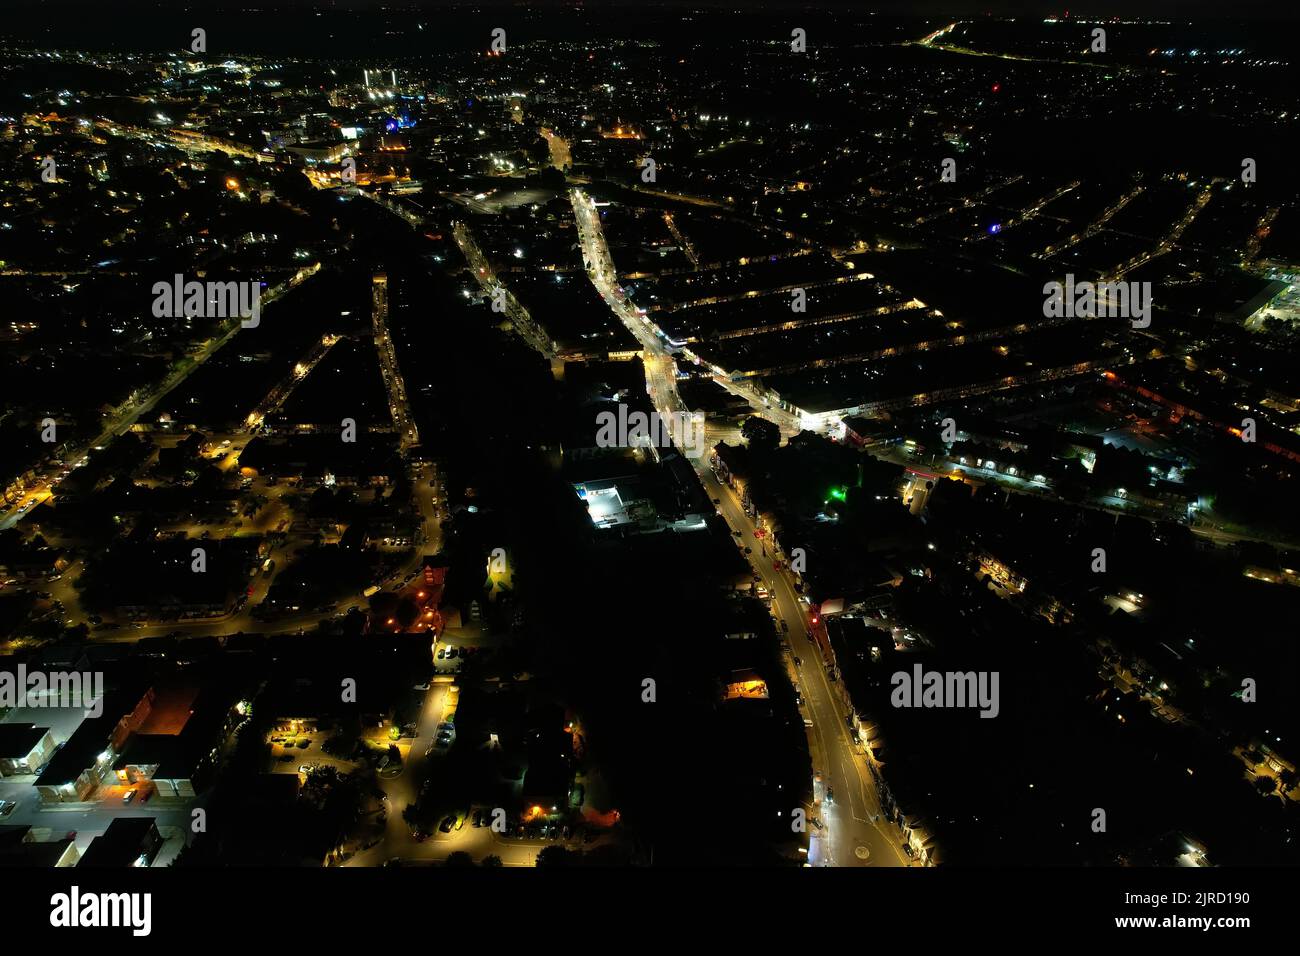 Aerial View Footage of British Houses, Illuminated Roads with Traffic on Motorways at England. High Angle Footage of British British City at Night. Stock Photo